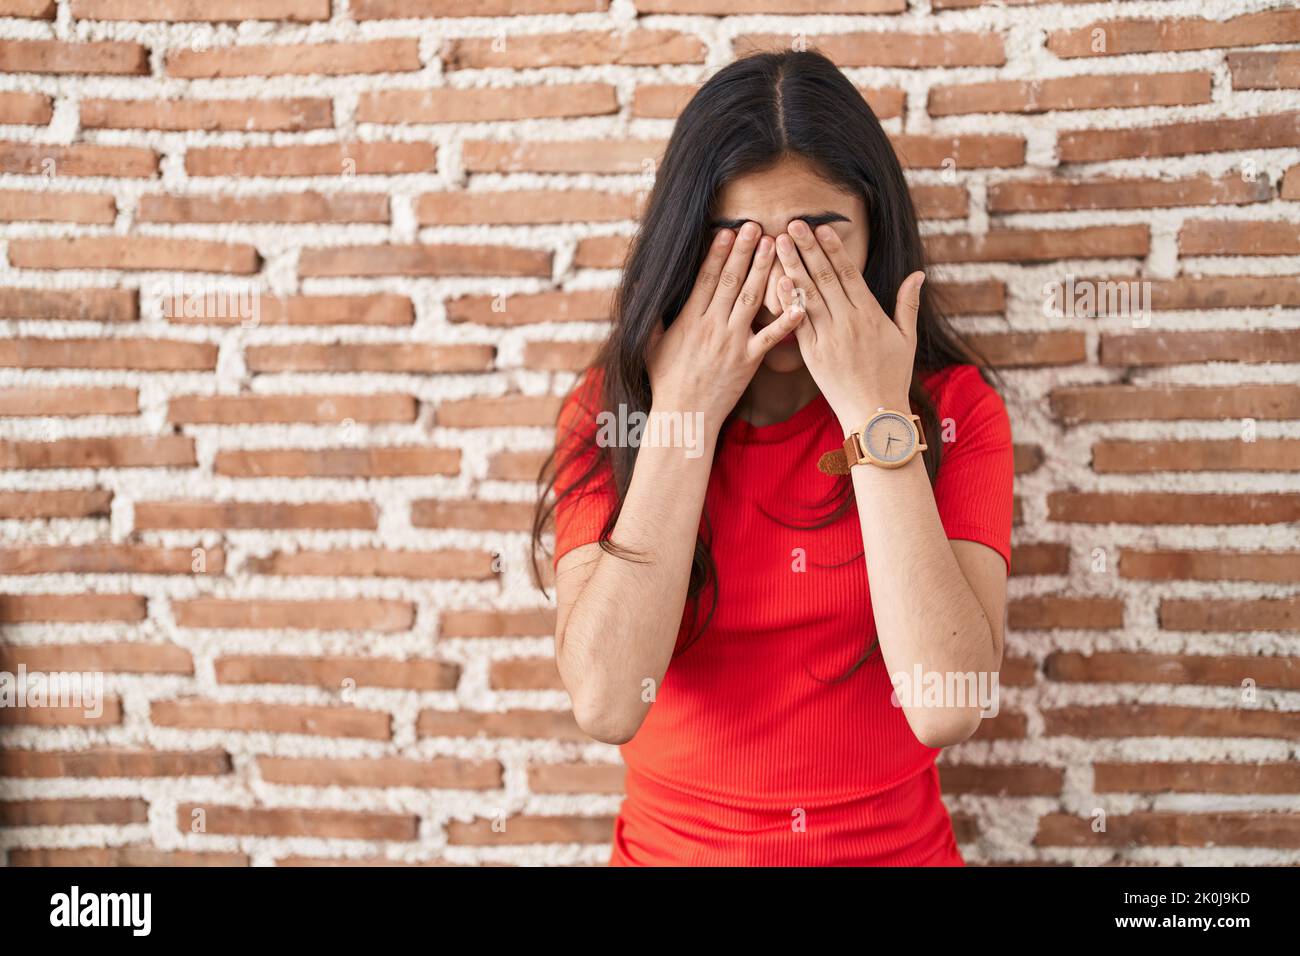 Young teenager girl standing over bricks wall rubbing eyes for fatigue and headache, sleepy and tired expression. vision problem Stock Photo